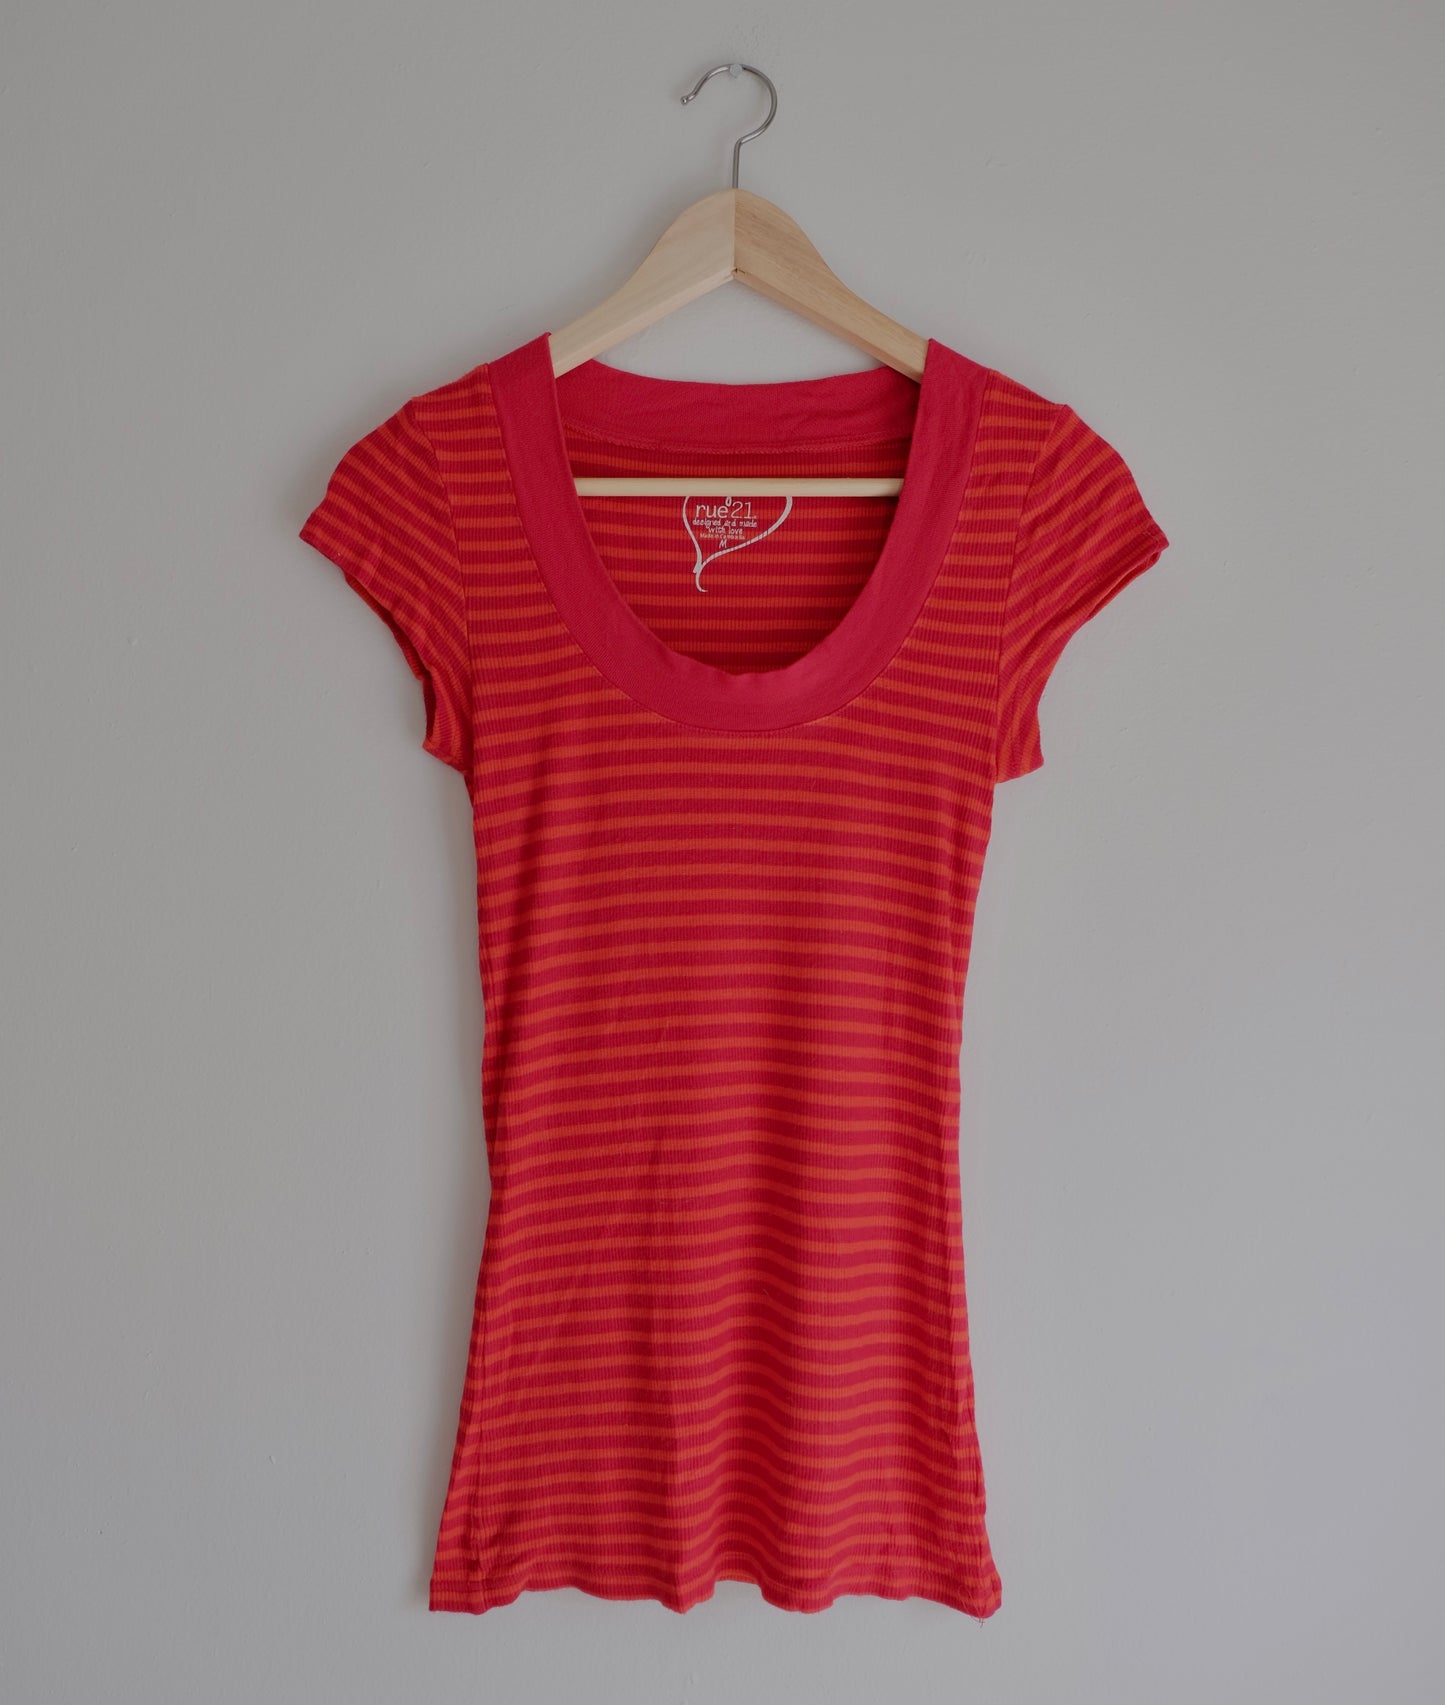 [frizzy finds] long red + orange top